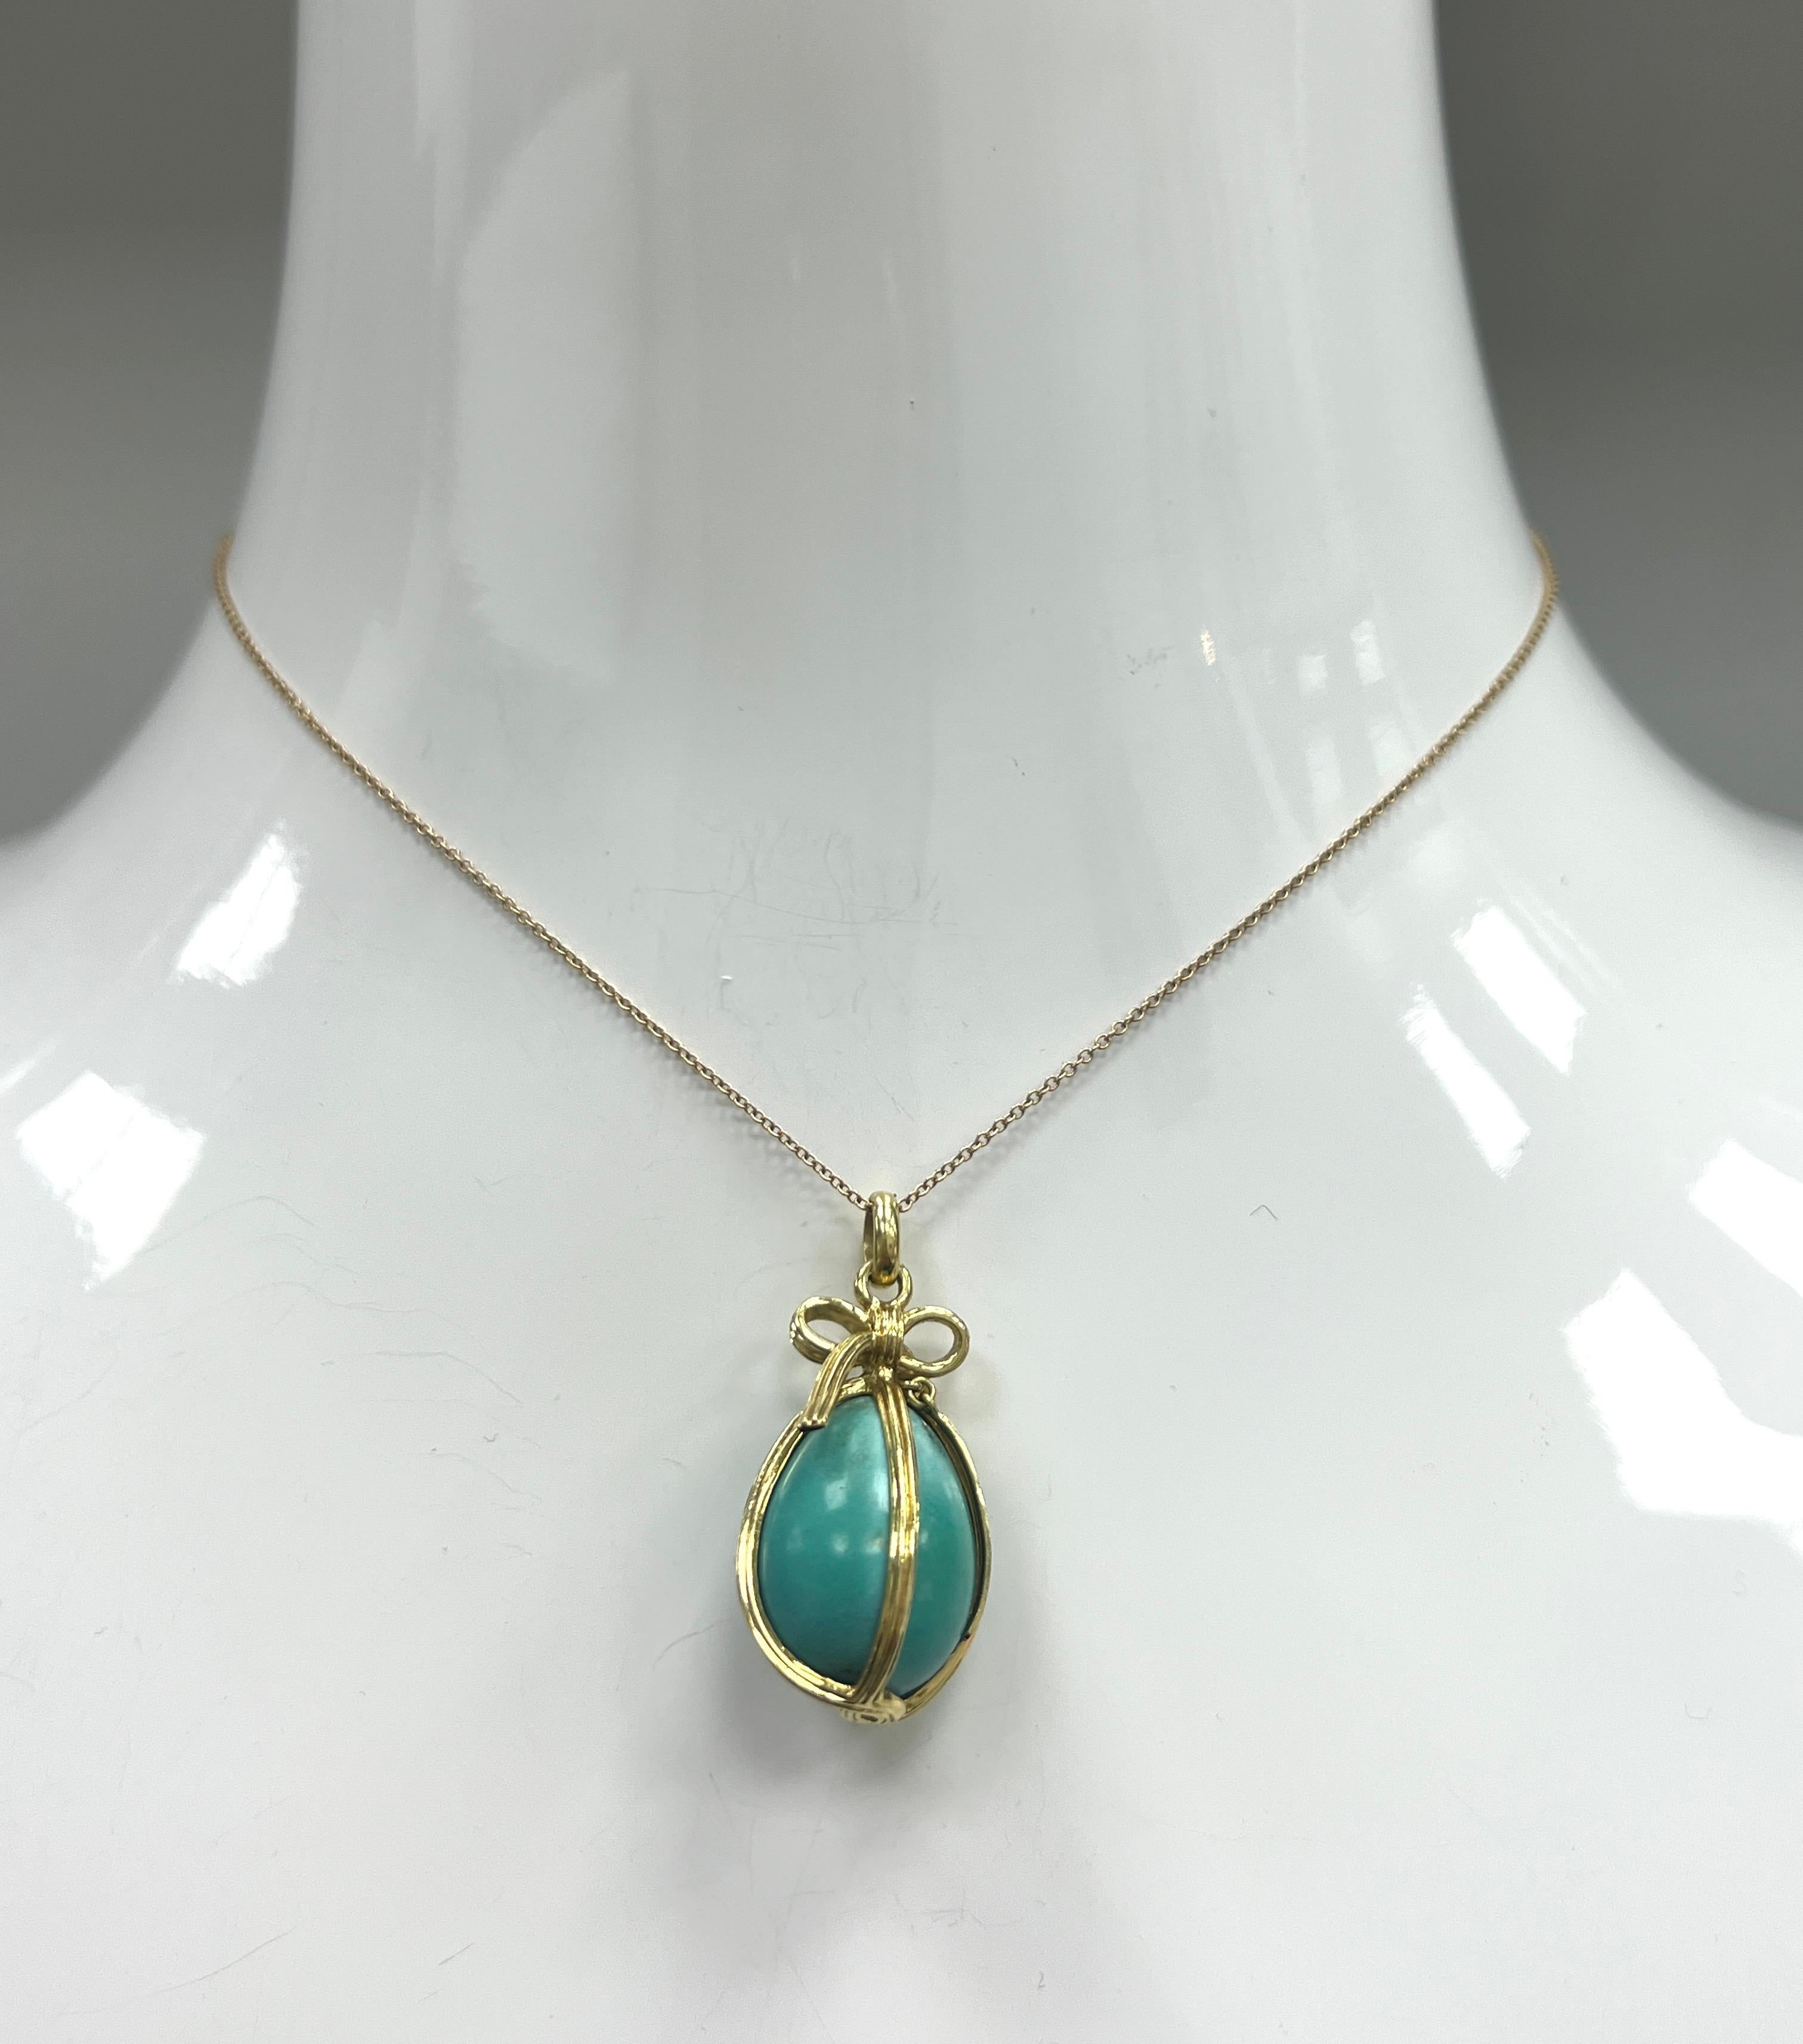 Women's Schlumberger for Tiffany & Co. Turquoise Egg Pendant Necklace